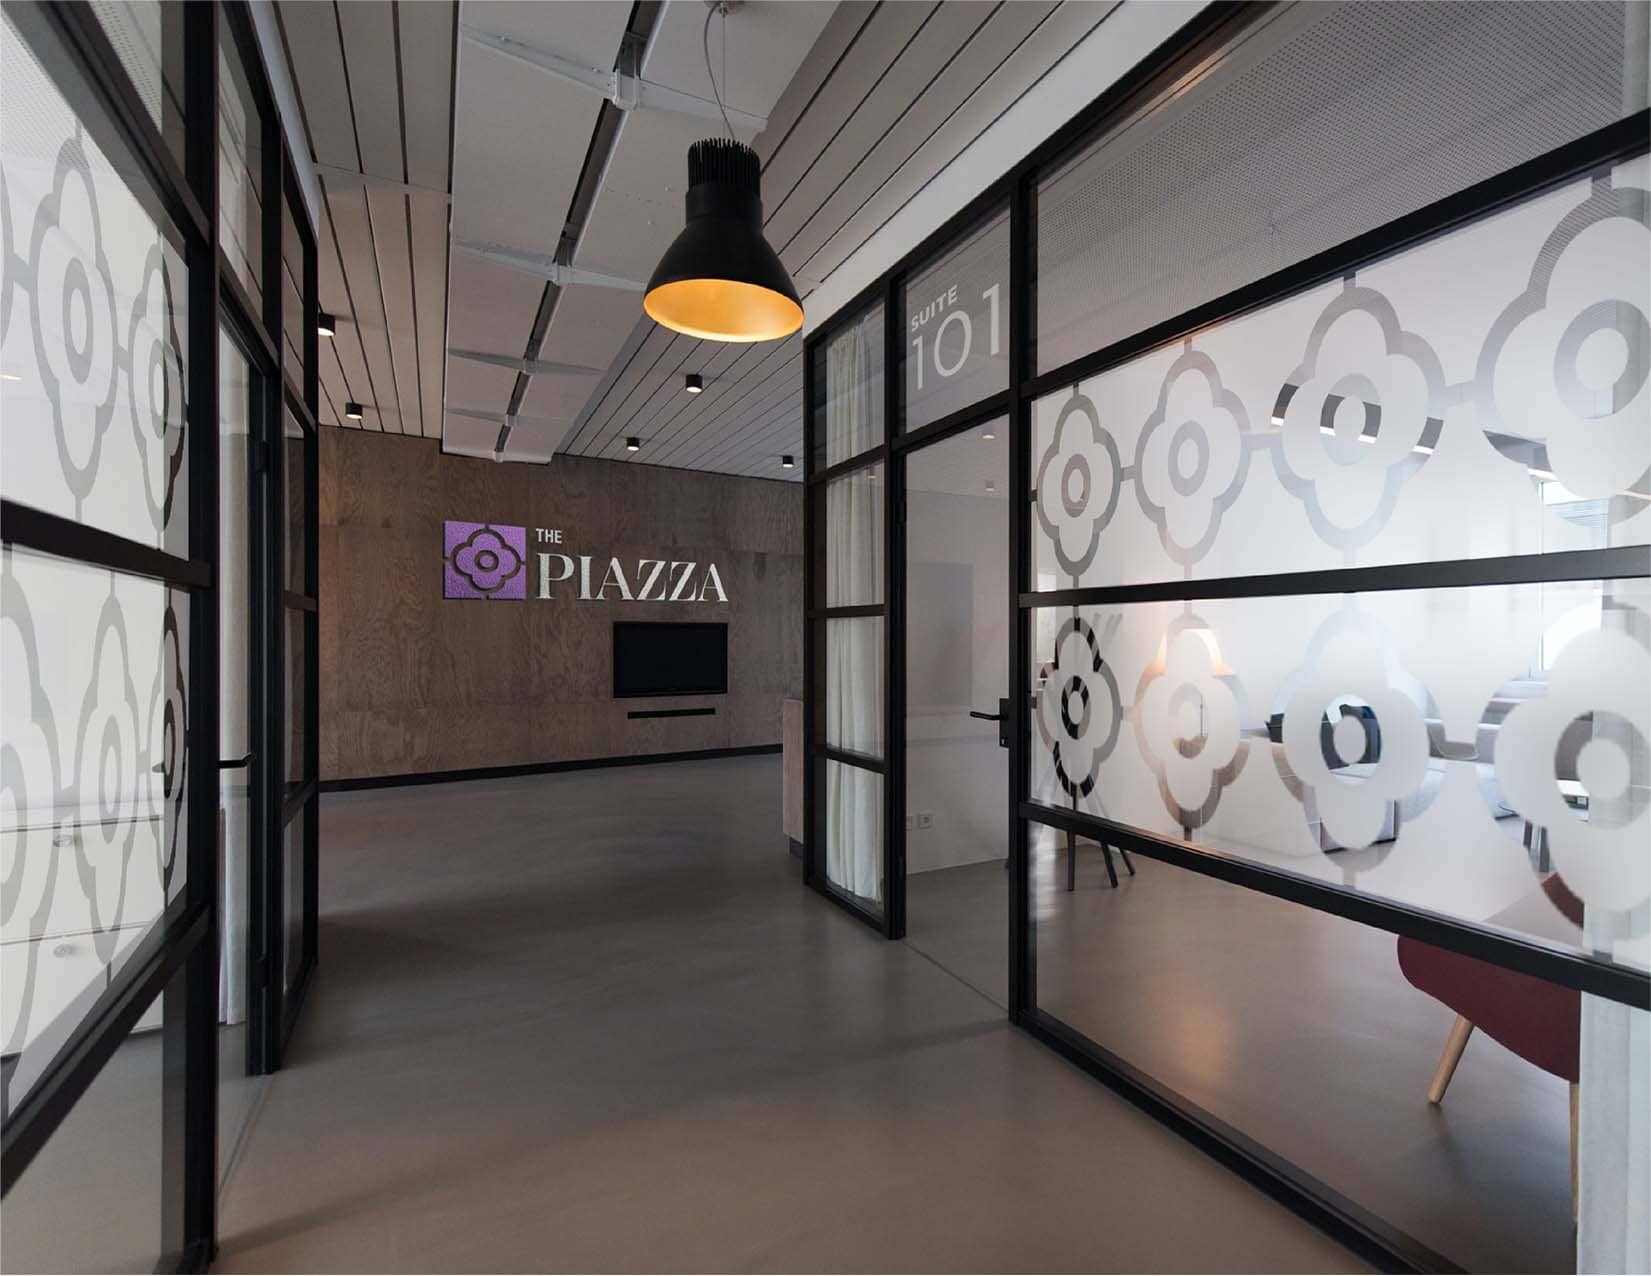 wall with the piazza logo inside an office building